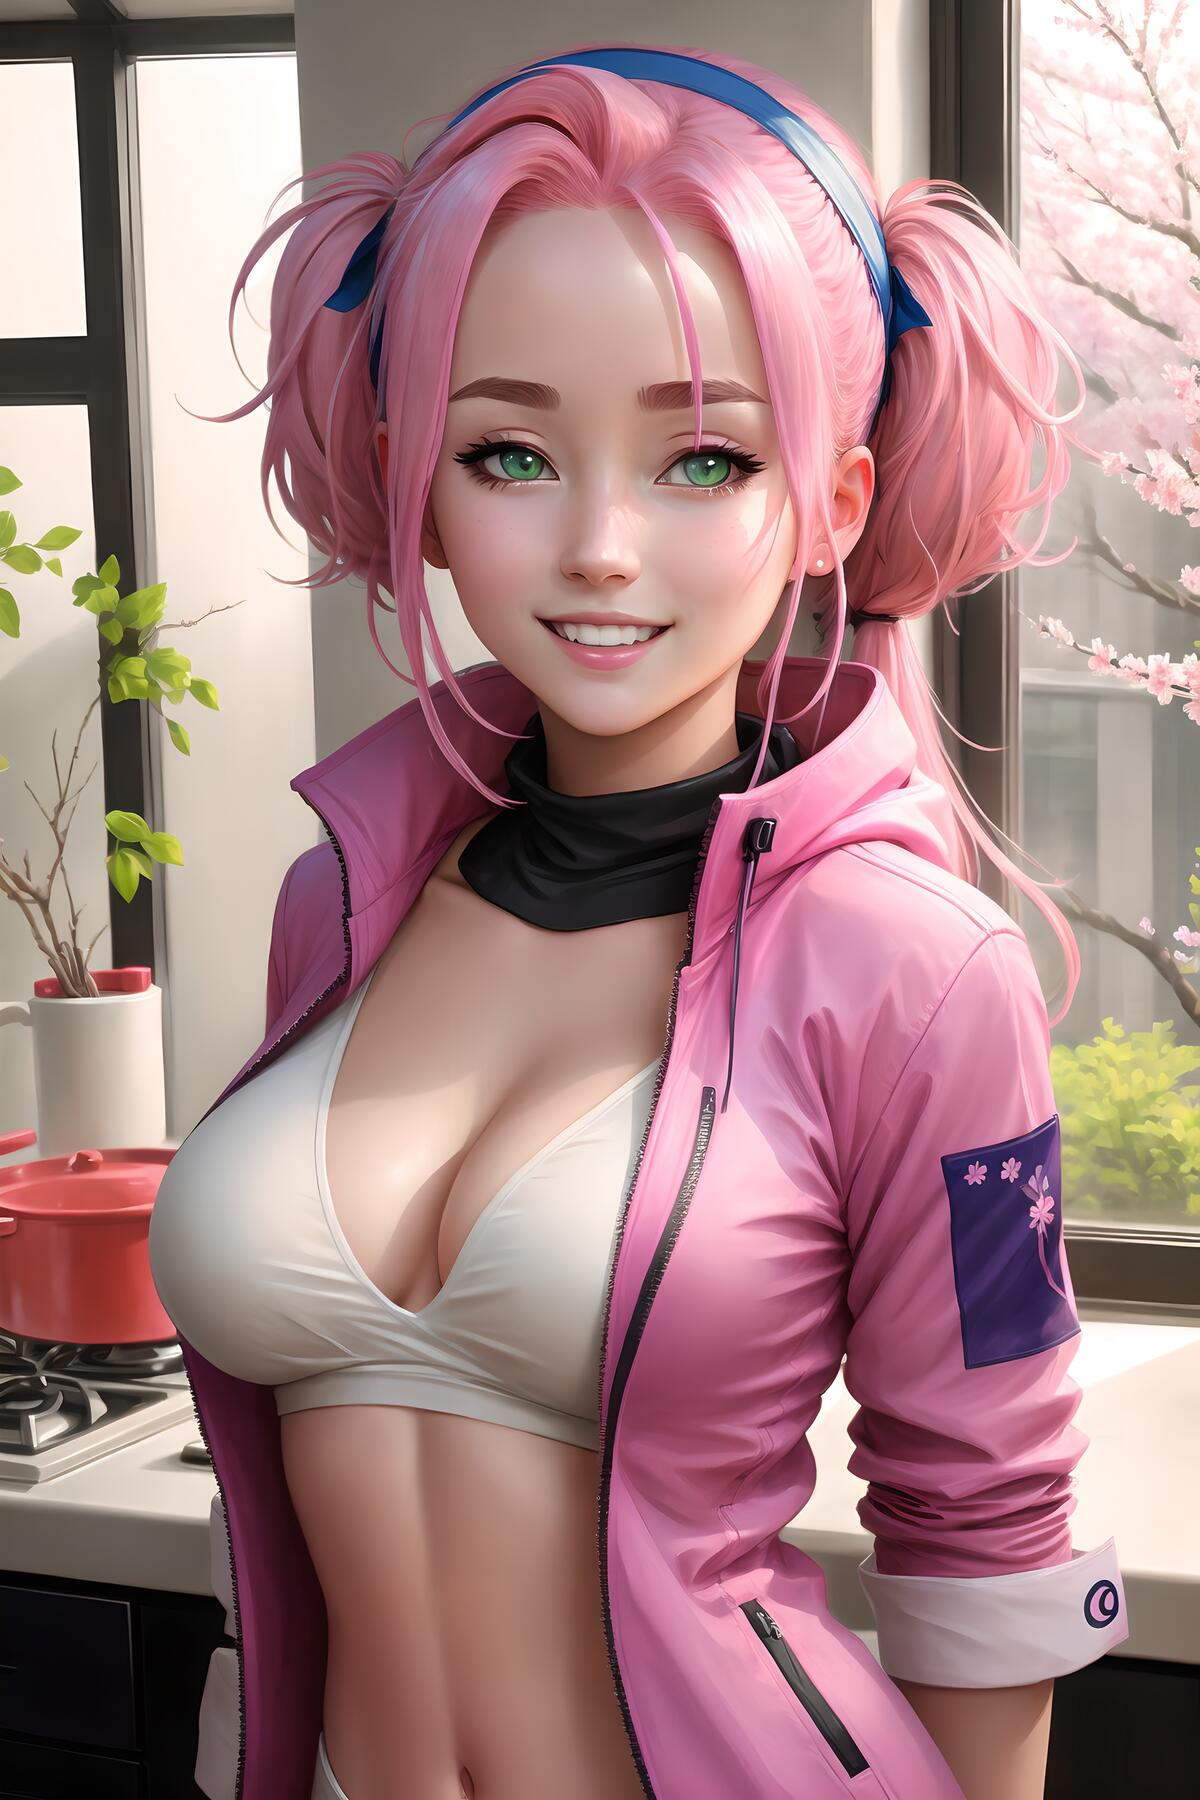 Fantasy girl with pink hair smiling